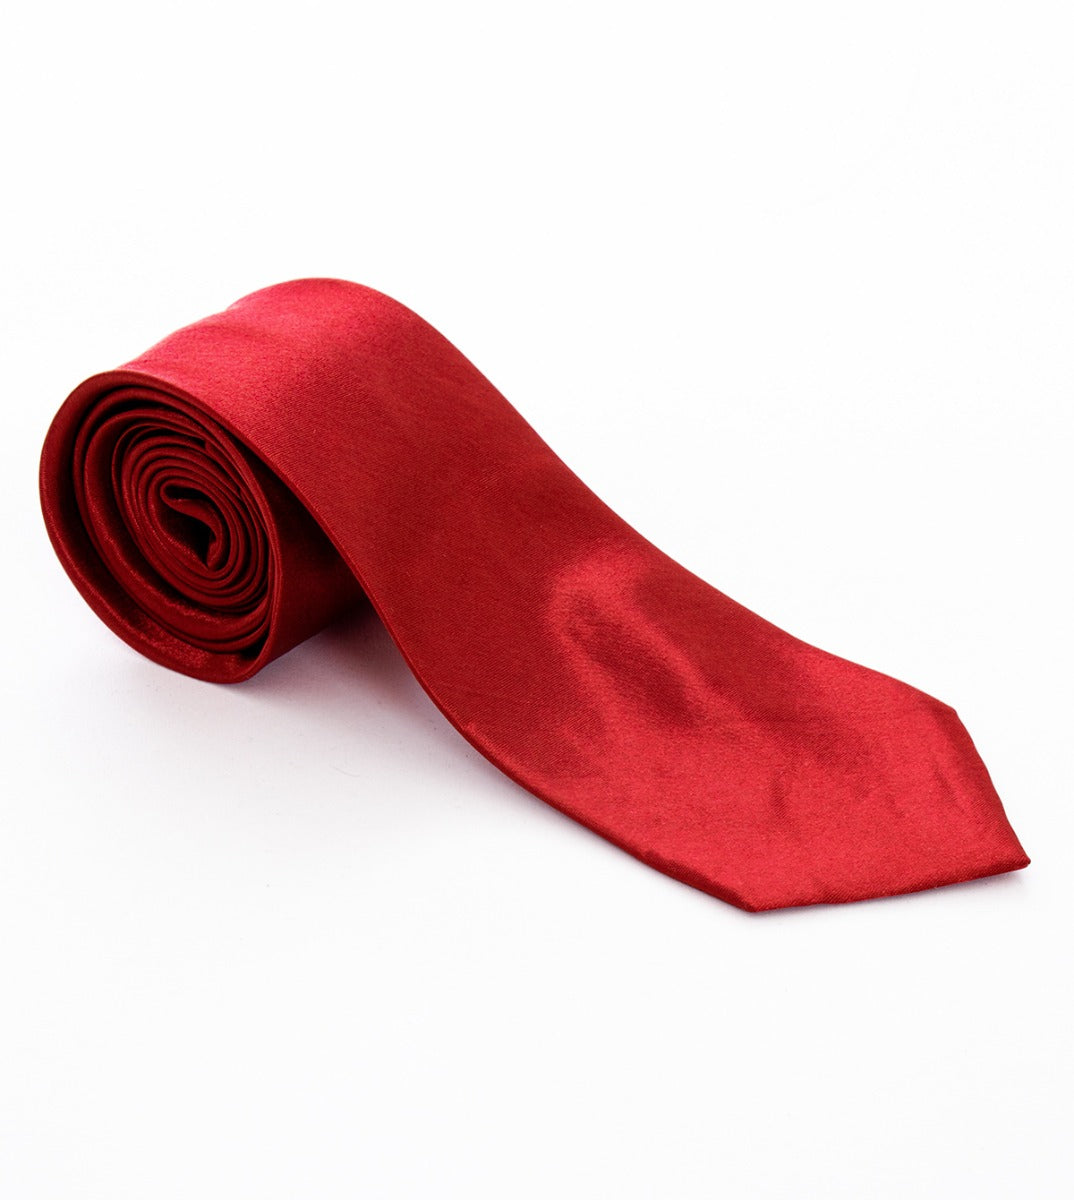 Unisex Men's Tie Elegant Ceremony Casual Basic Red Satin GIOSAL-CP1029A